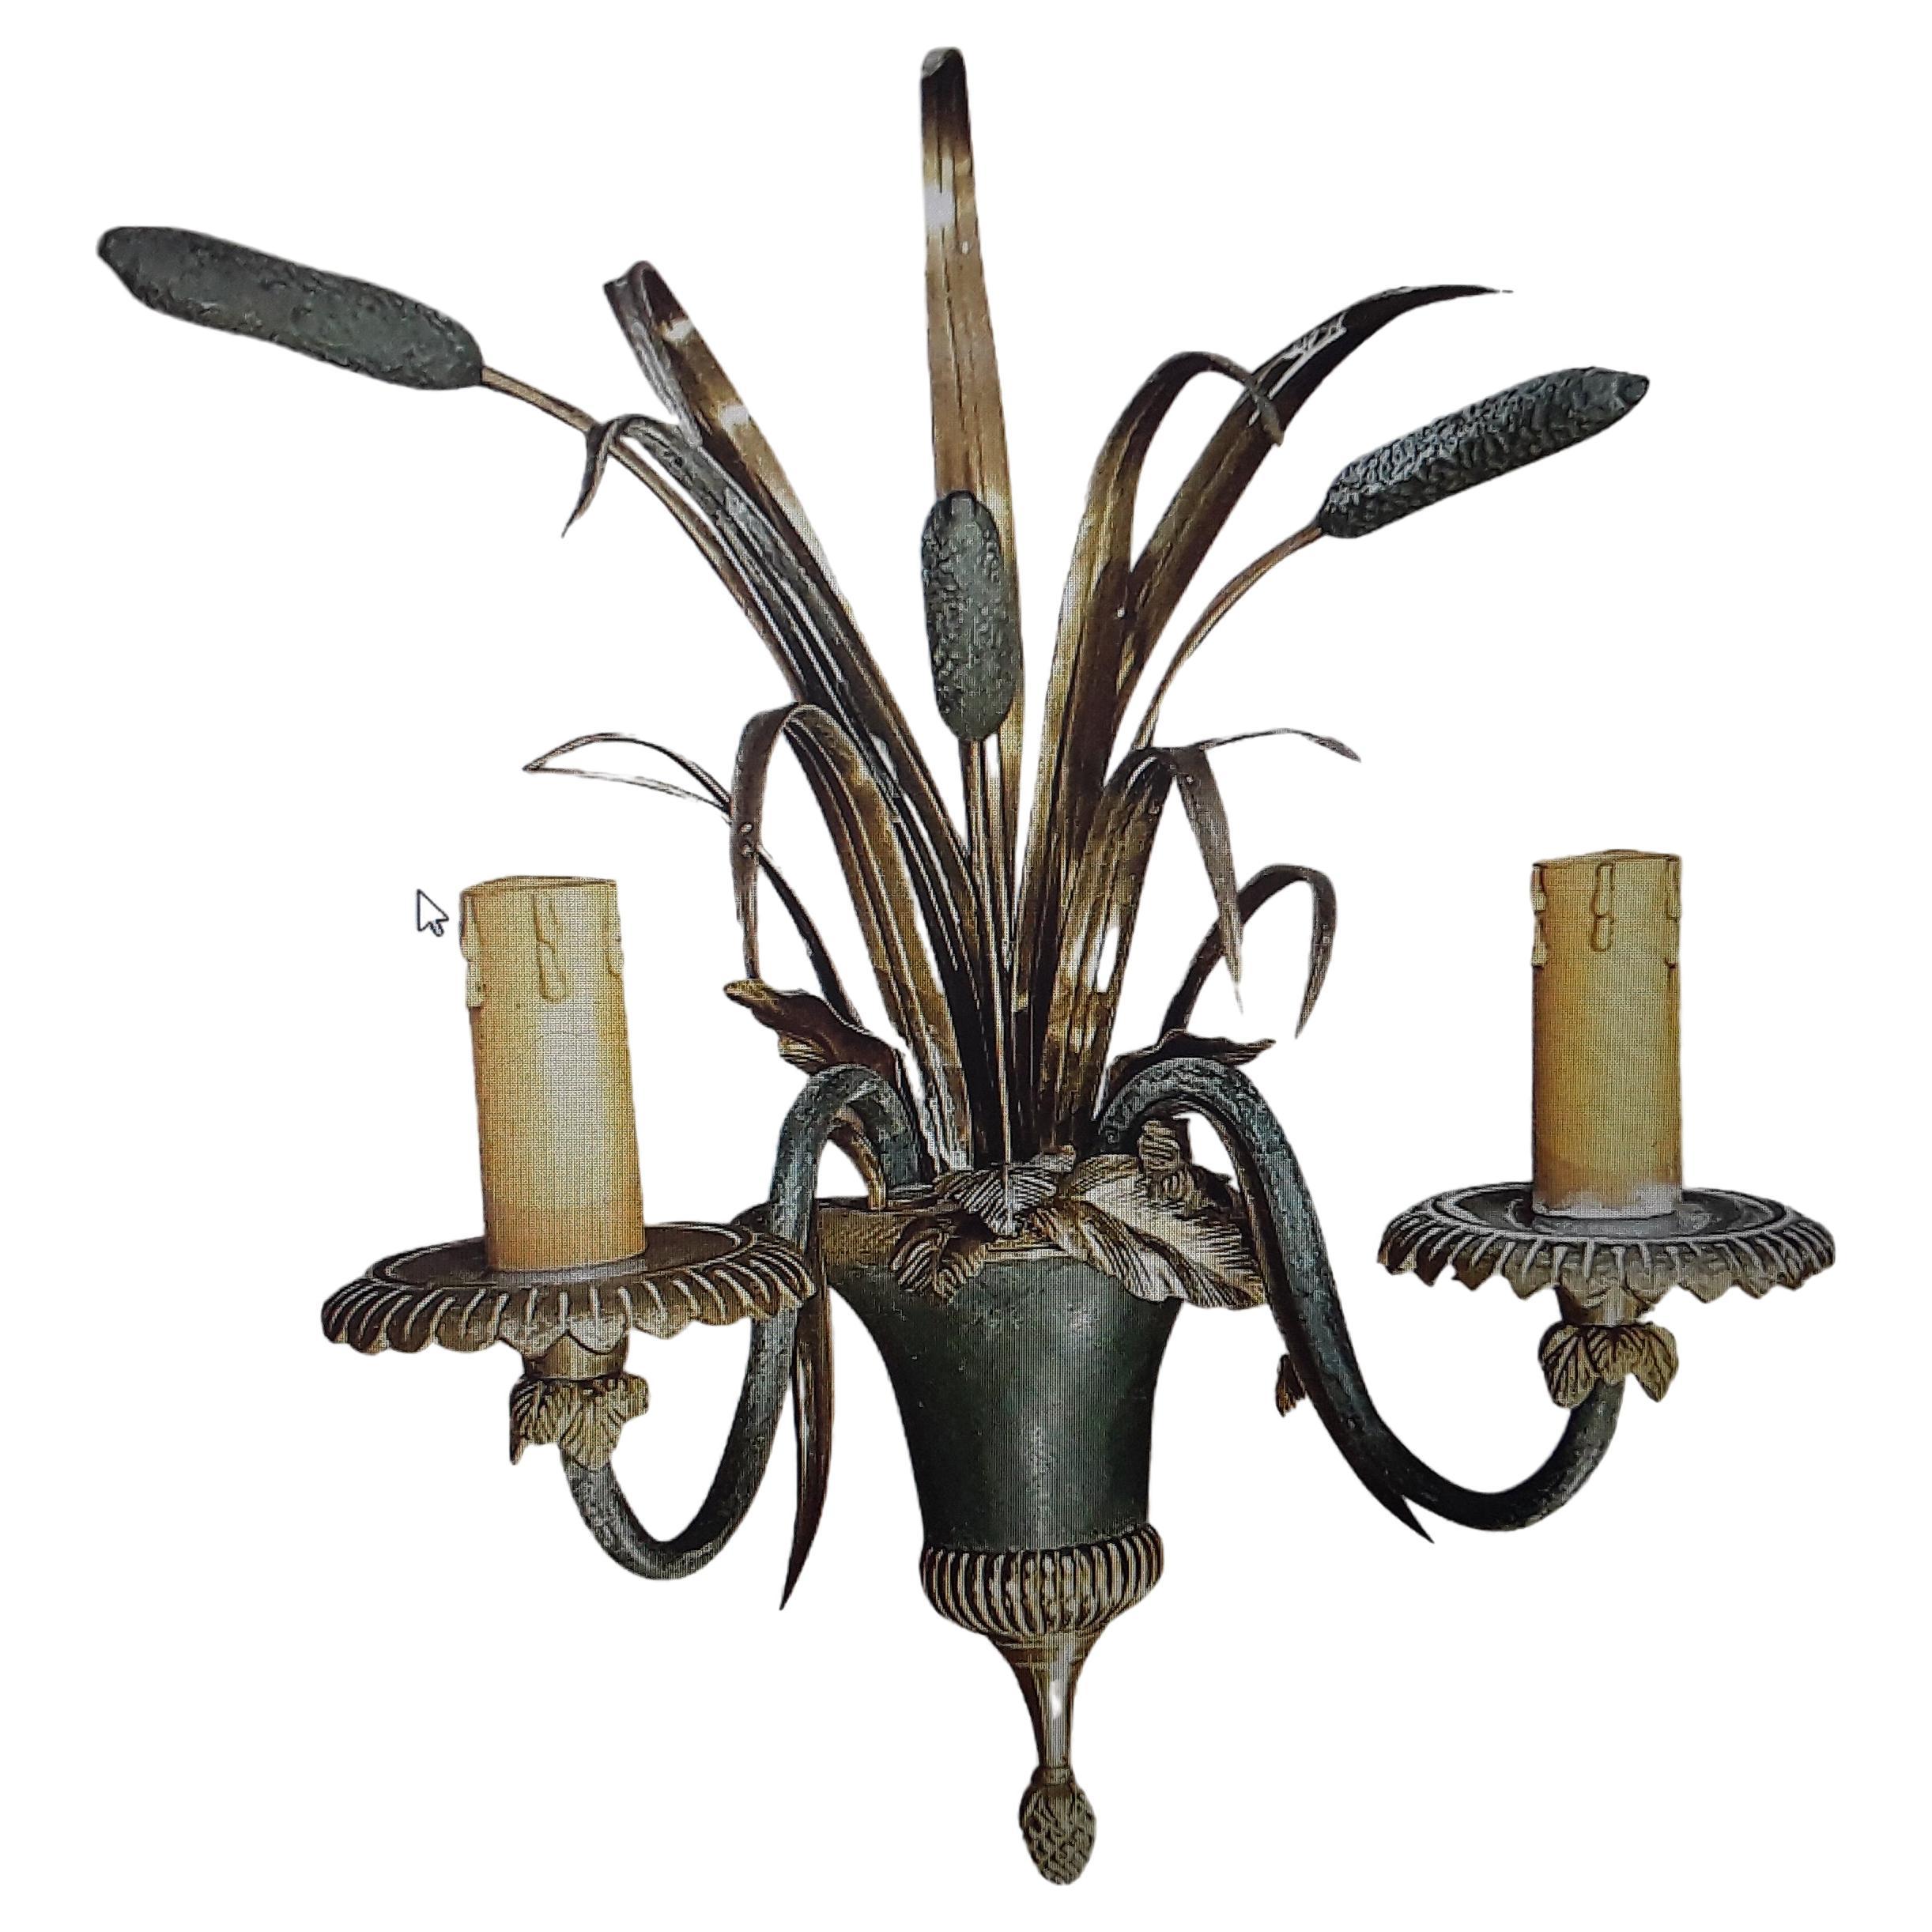 1940s French Regency Gilt &Patinated Bronze Floral Wall Sconce by Maison Charles For Sale